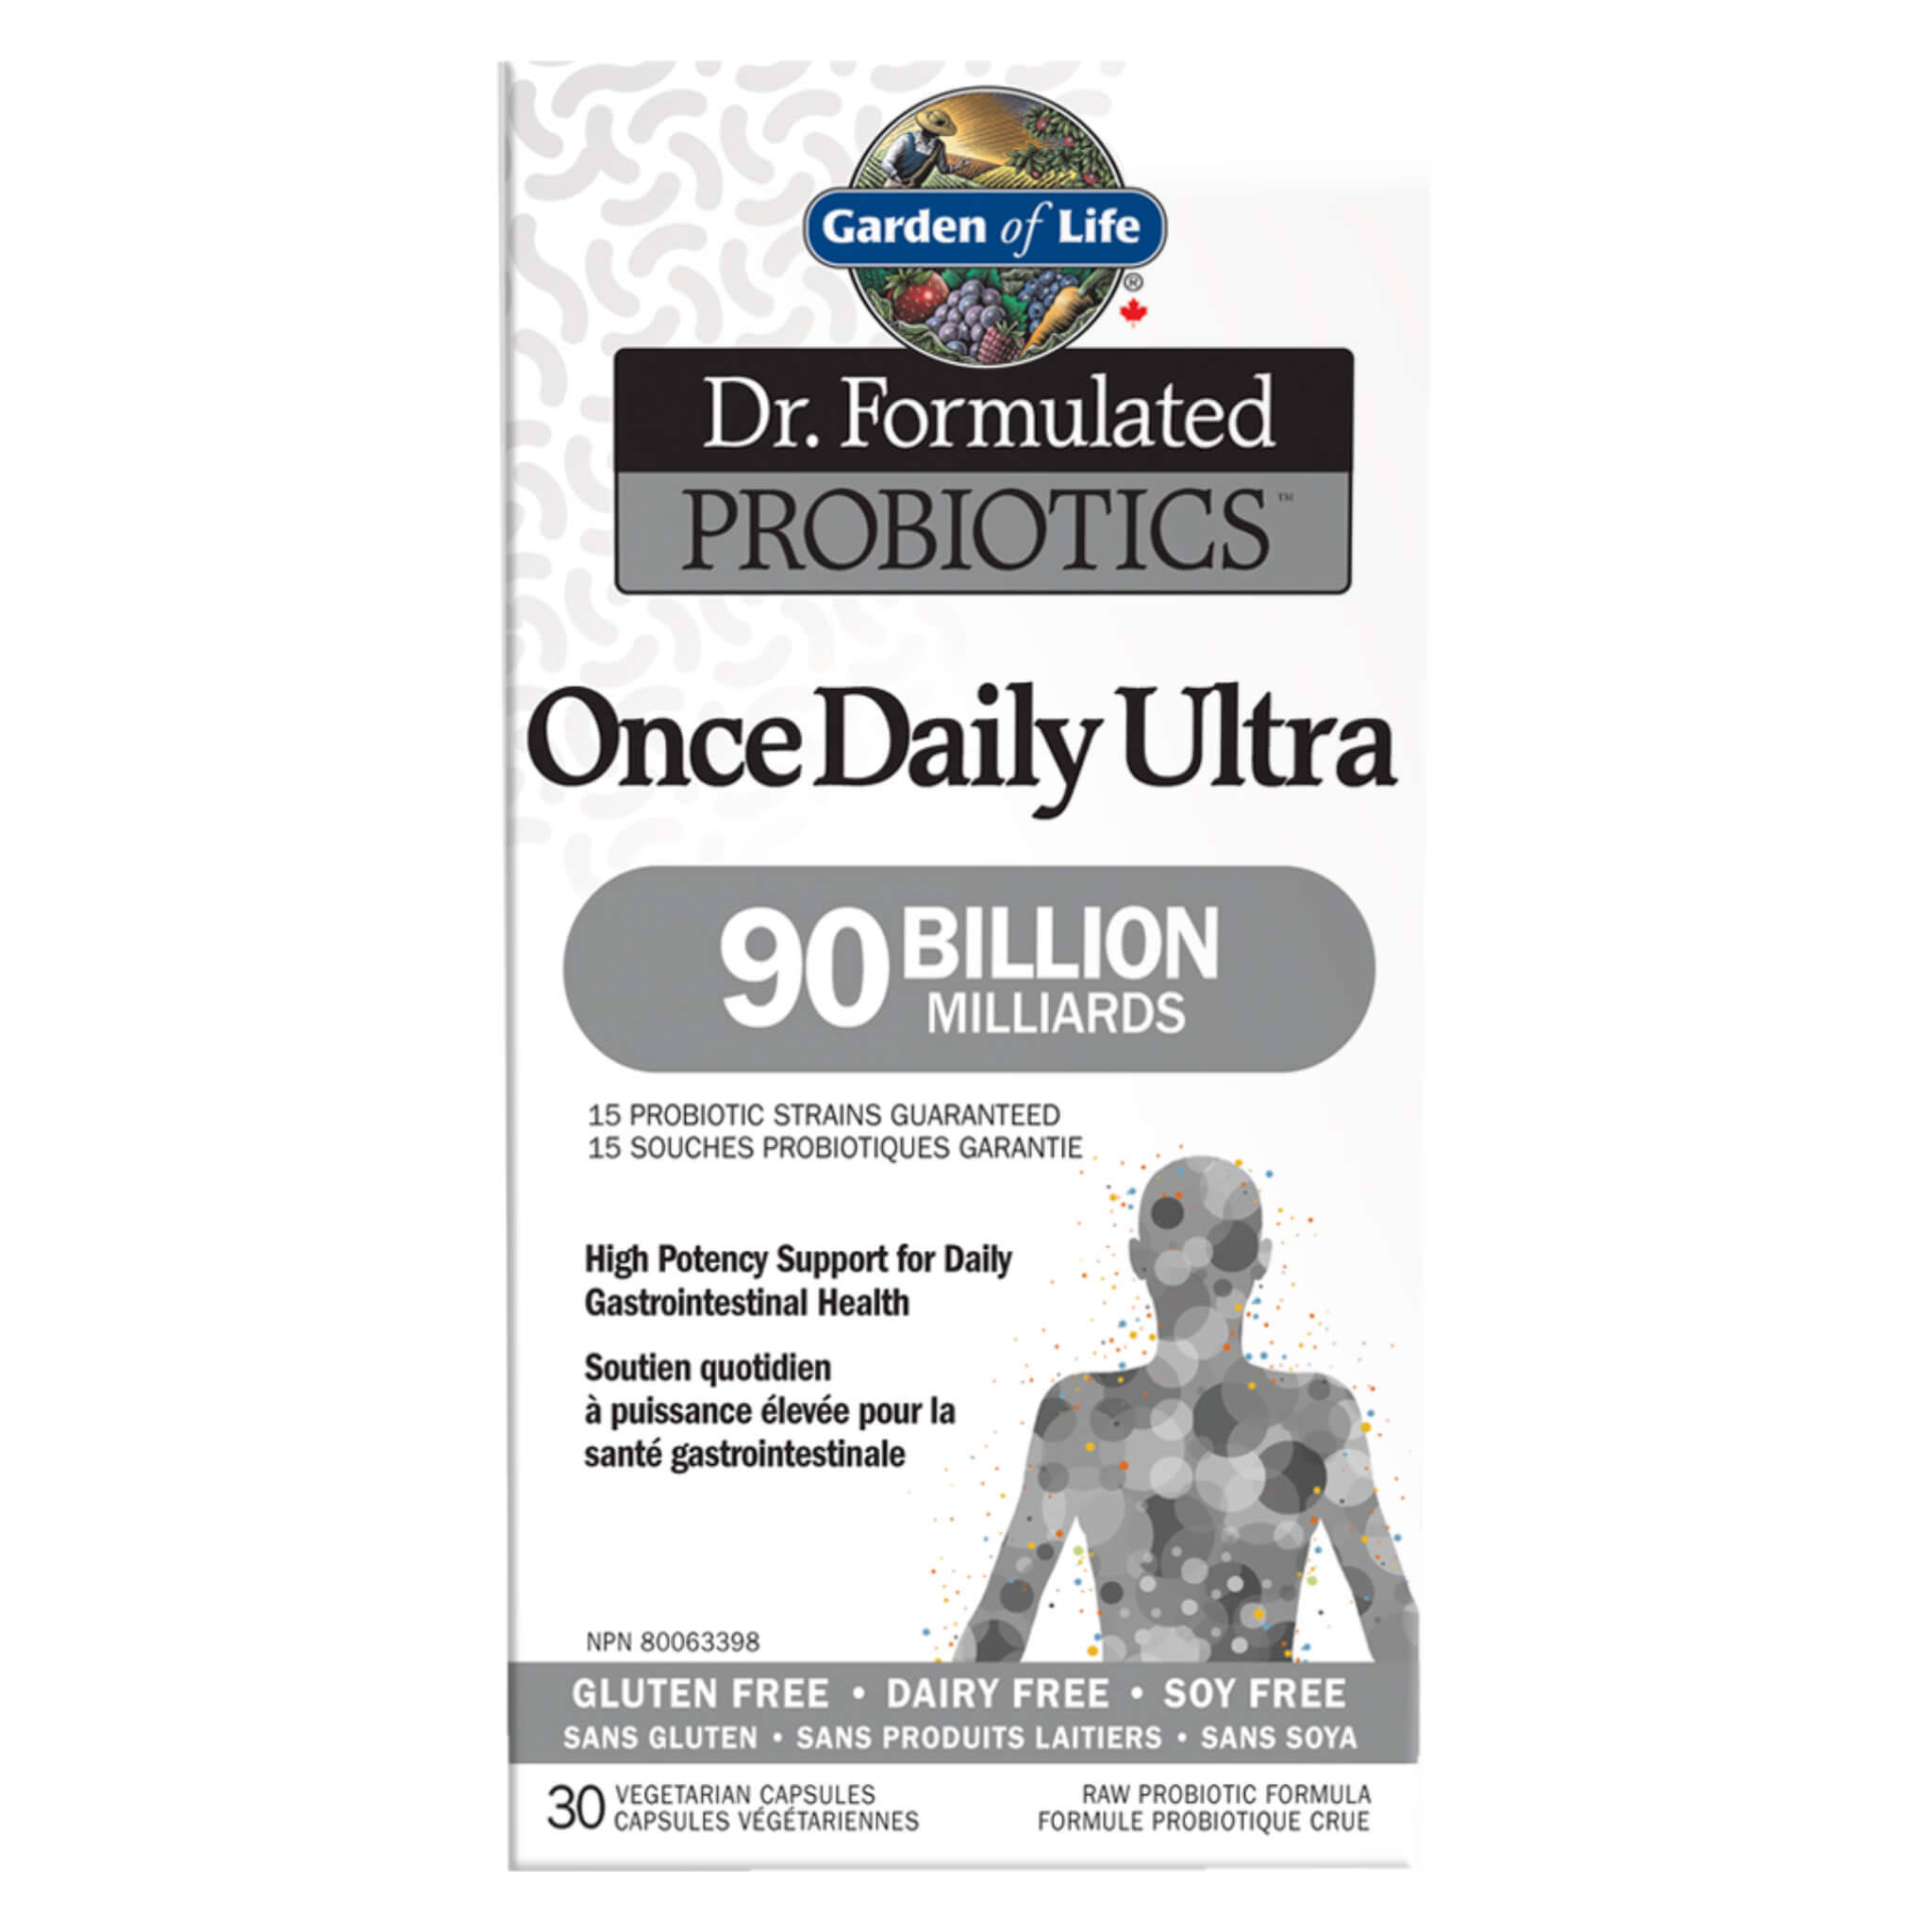 Garden of Life Dr. Formulated Probiotics - Once Daily Ultra Capsules